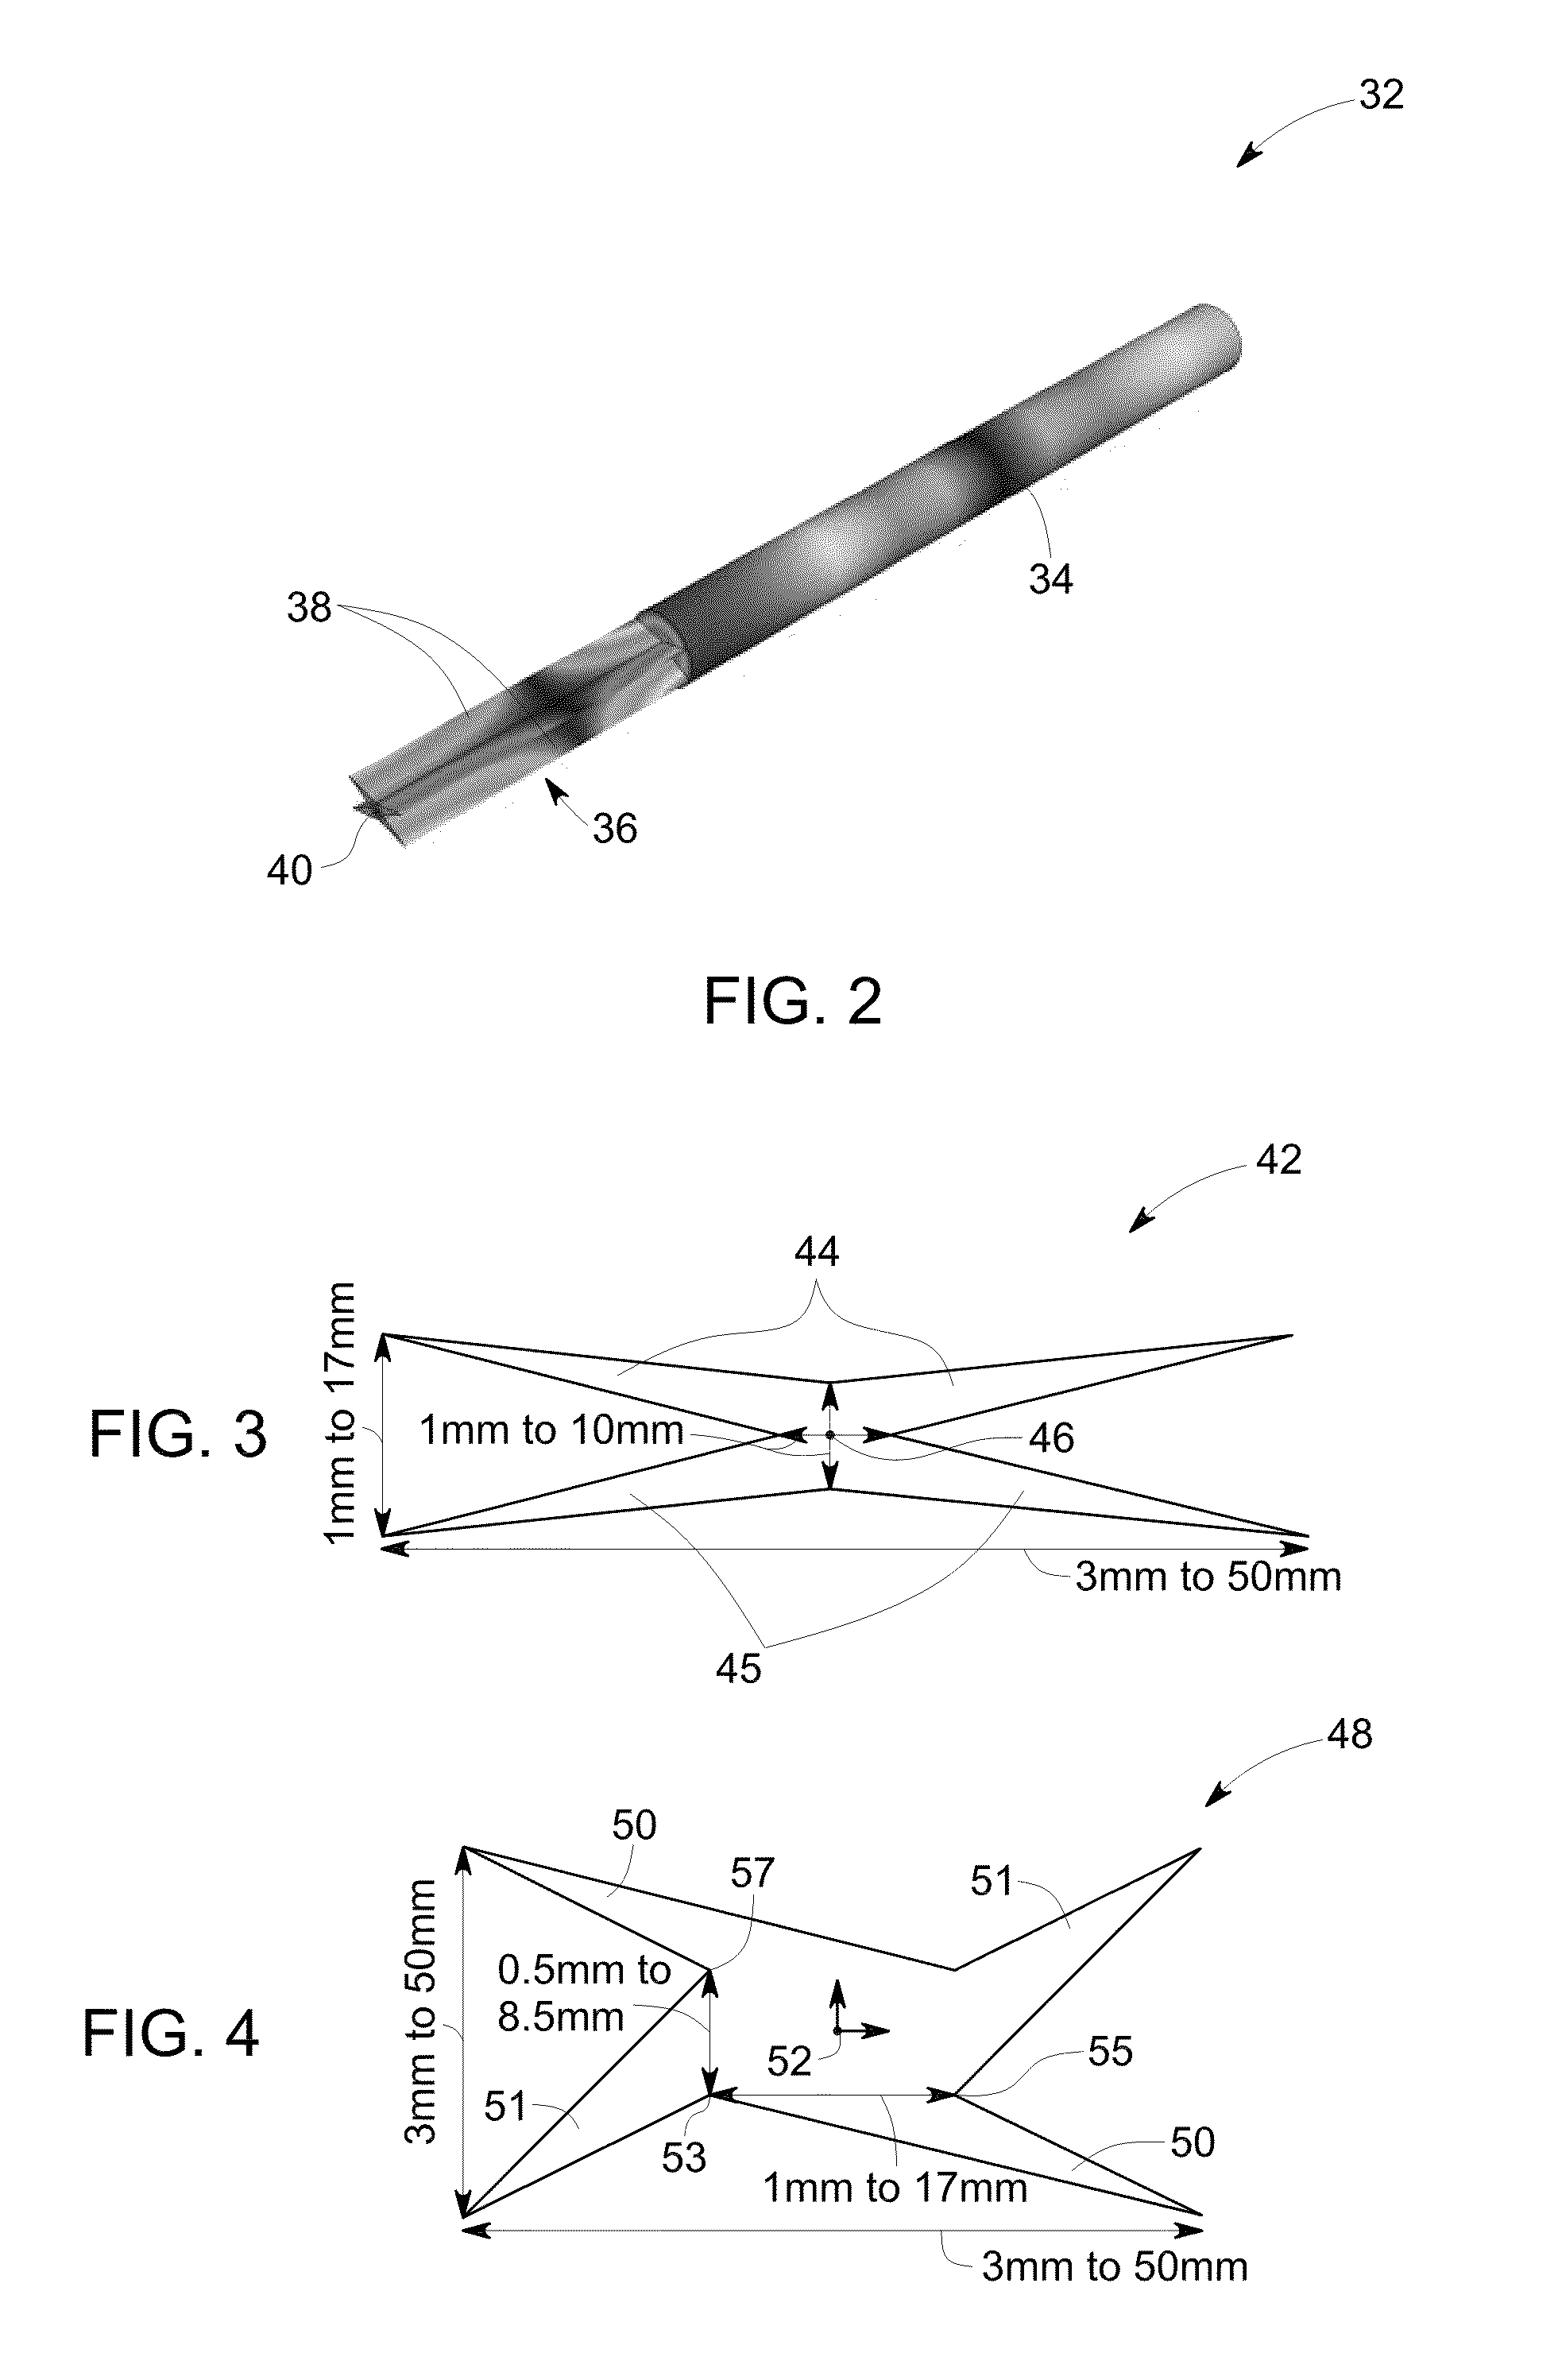 Torsional sensor, method thereof, and system for measurement of fluid parameters